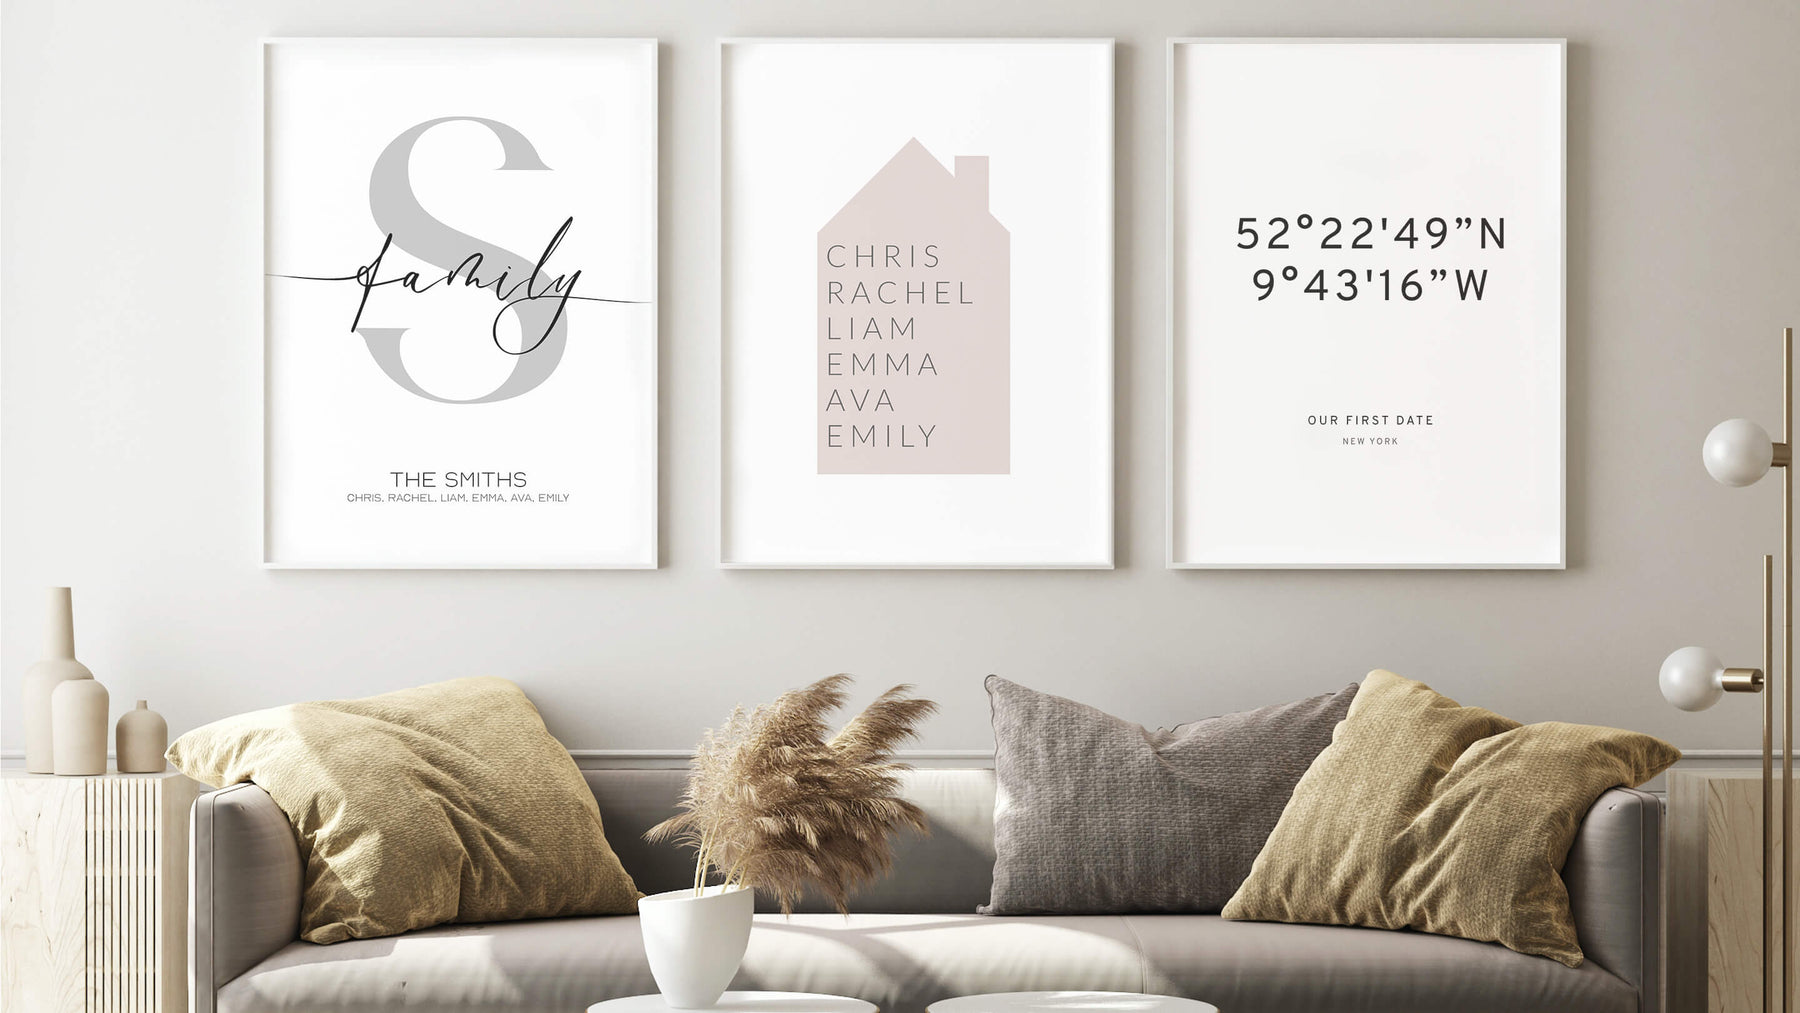 Posters personalizados A5 - Happily Store